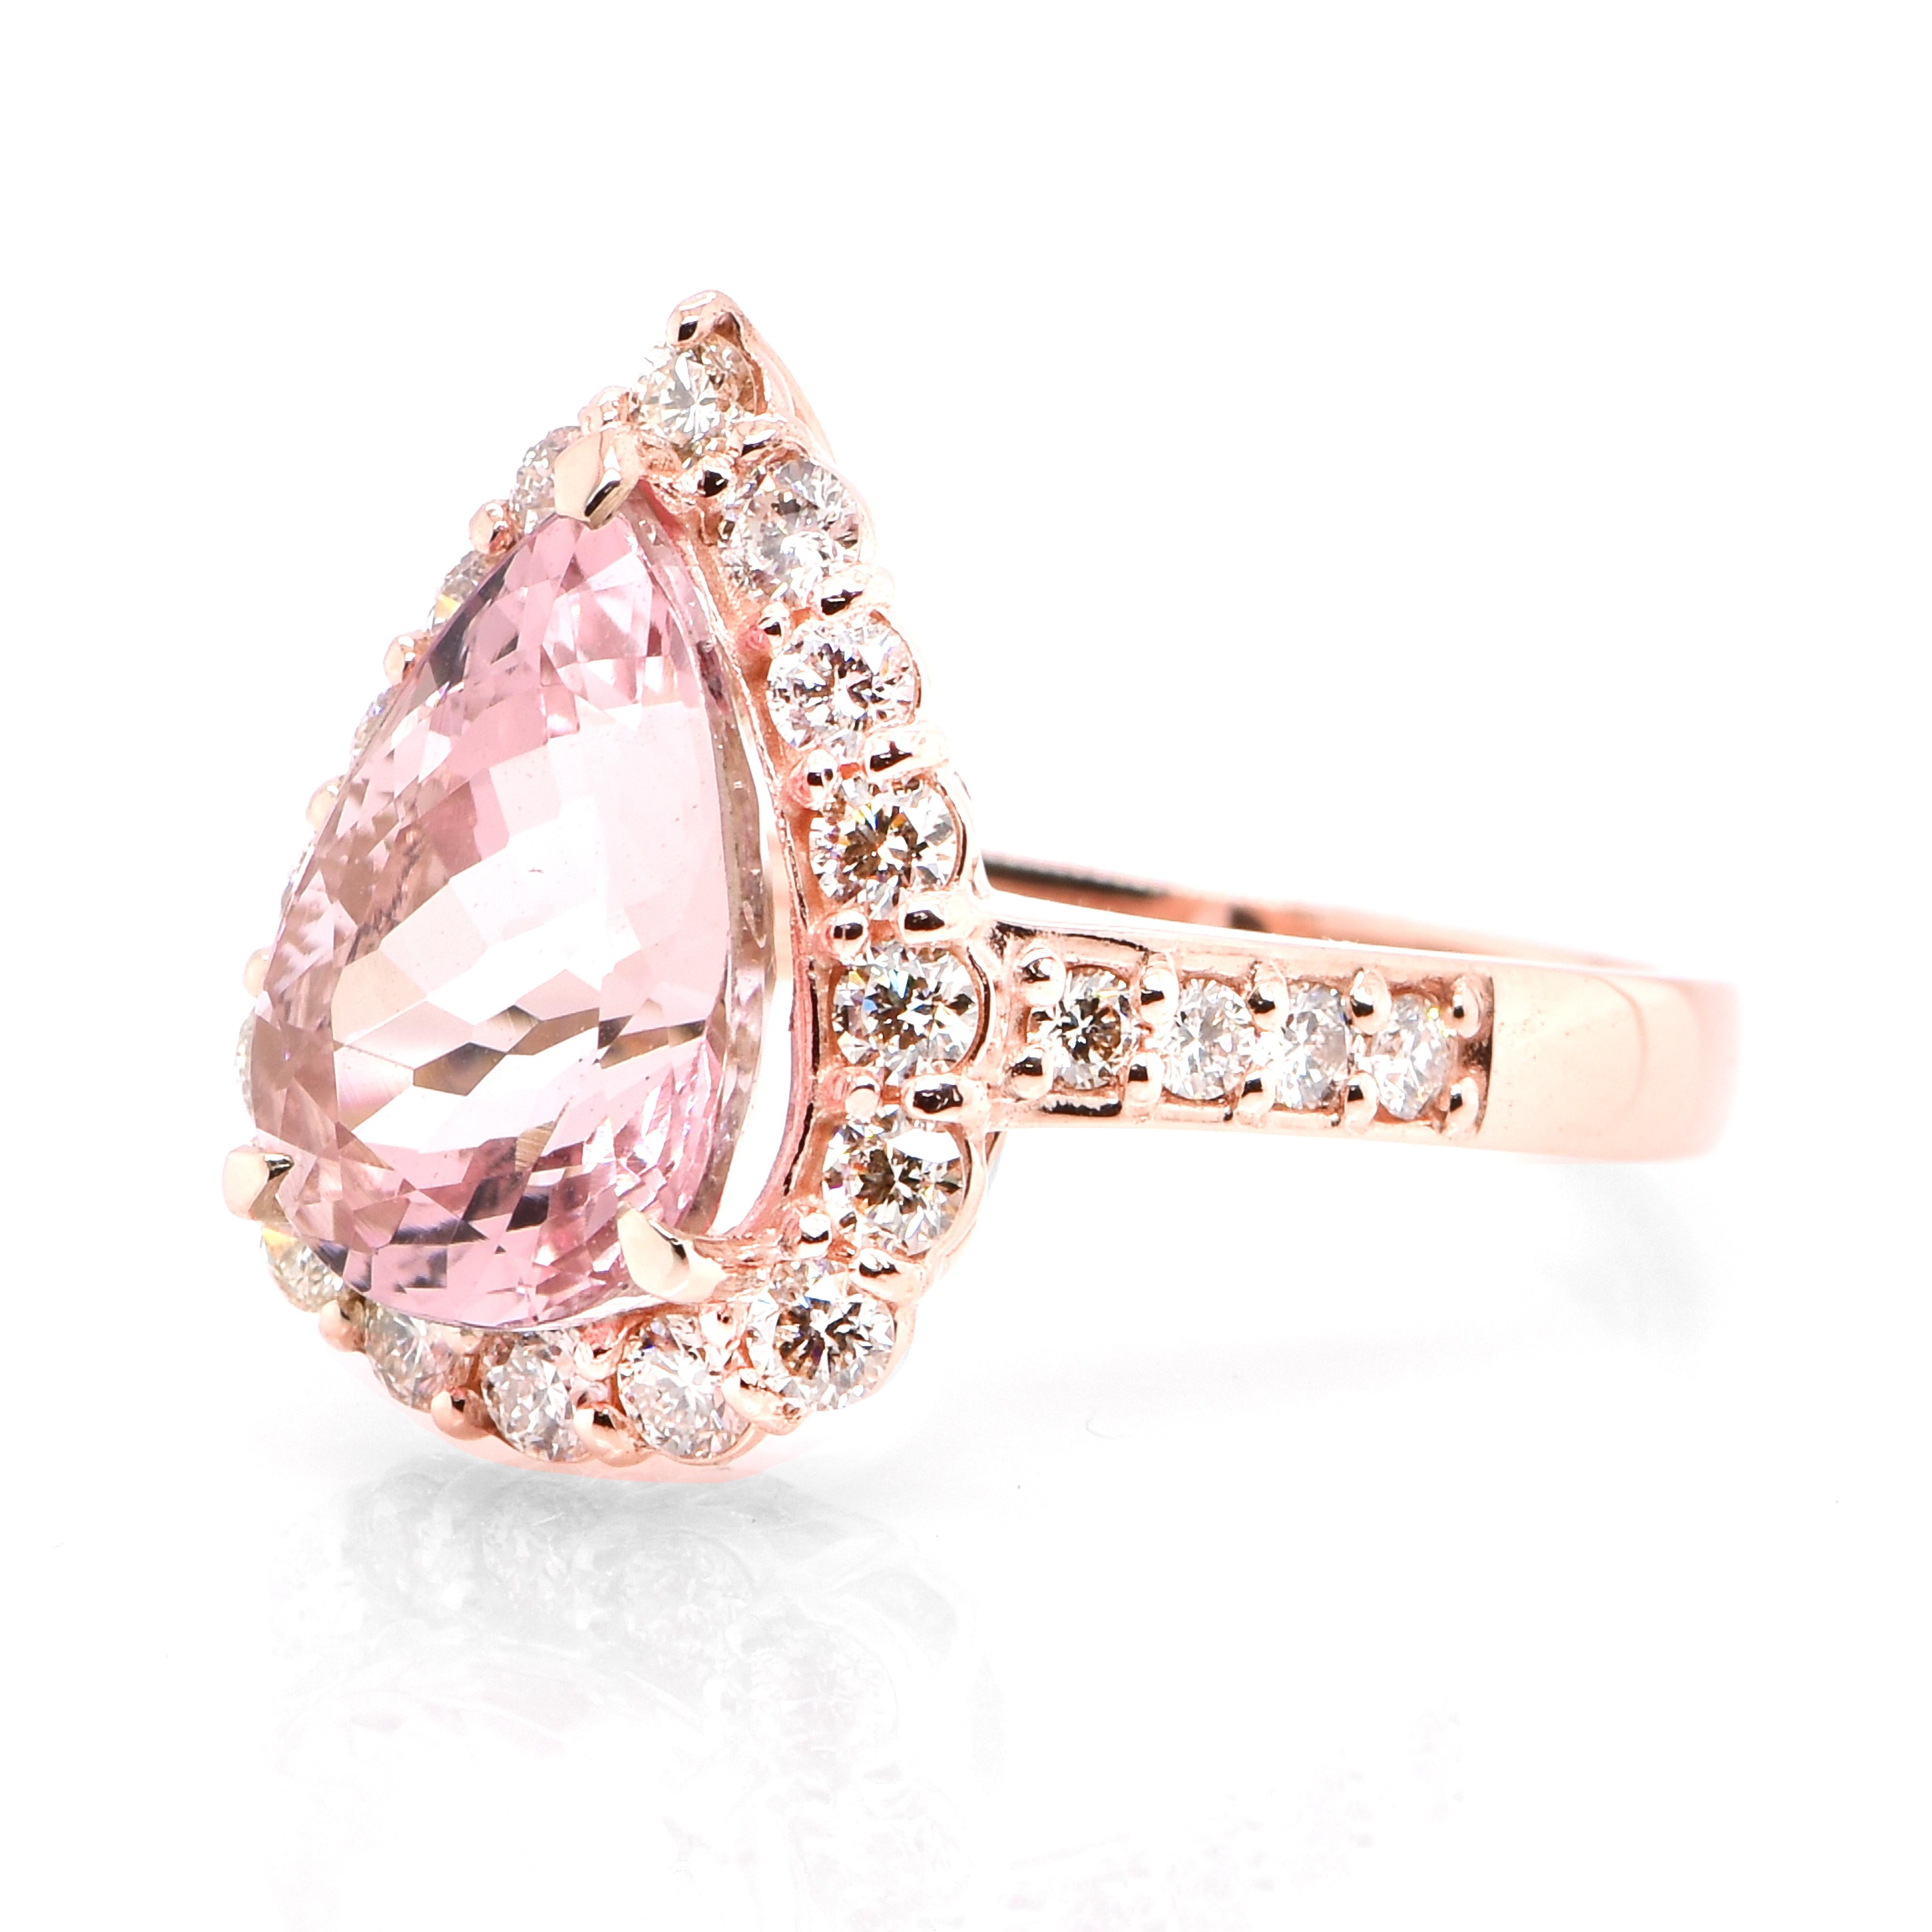 A beautiful Cocktail Ring featuring a 3.51 Carat, Natural Morganite (Pink Beryl) and 0.80 Carats of Diamond Accents set in 18 Karat Rose Gold. Having been first discovered in the early 1900s, Morganite was named after the famed banker and gem